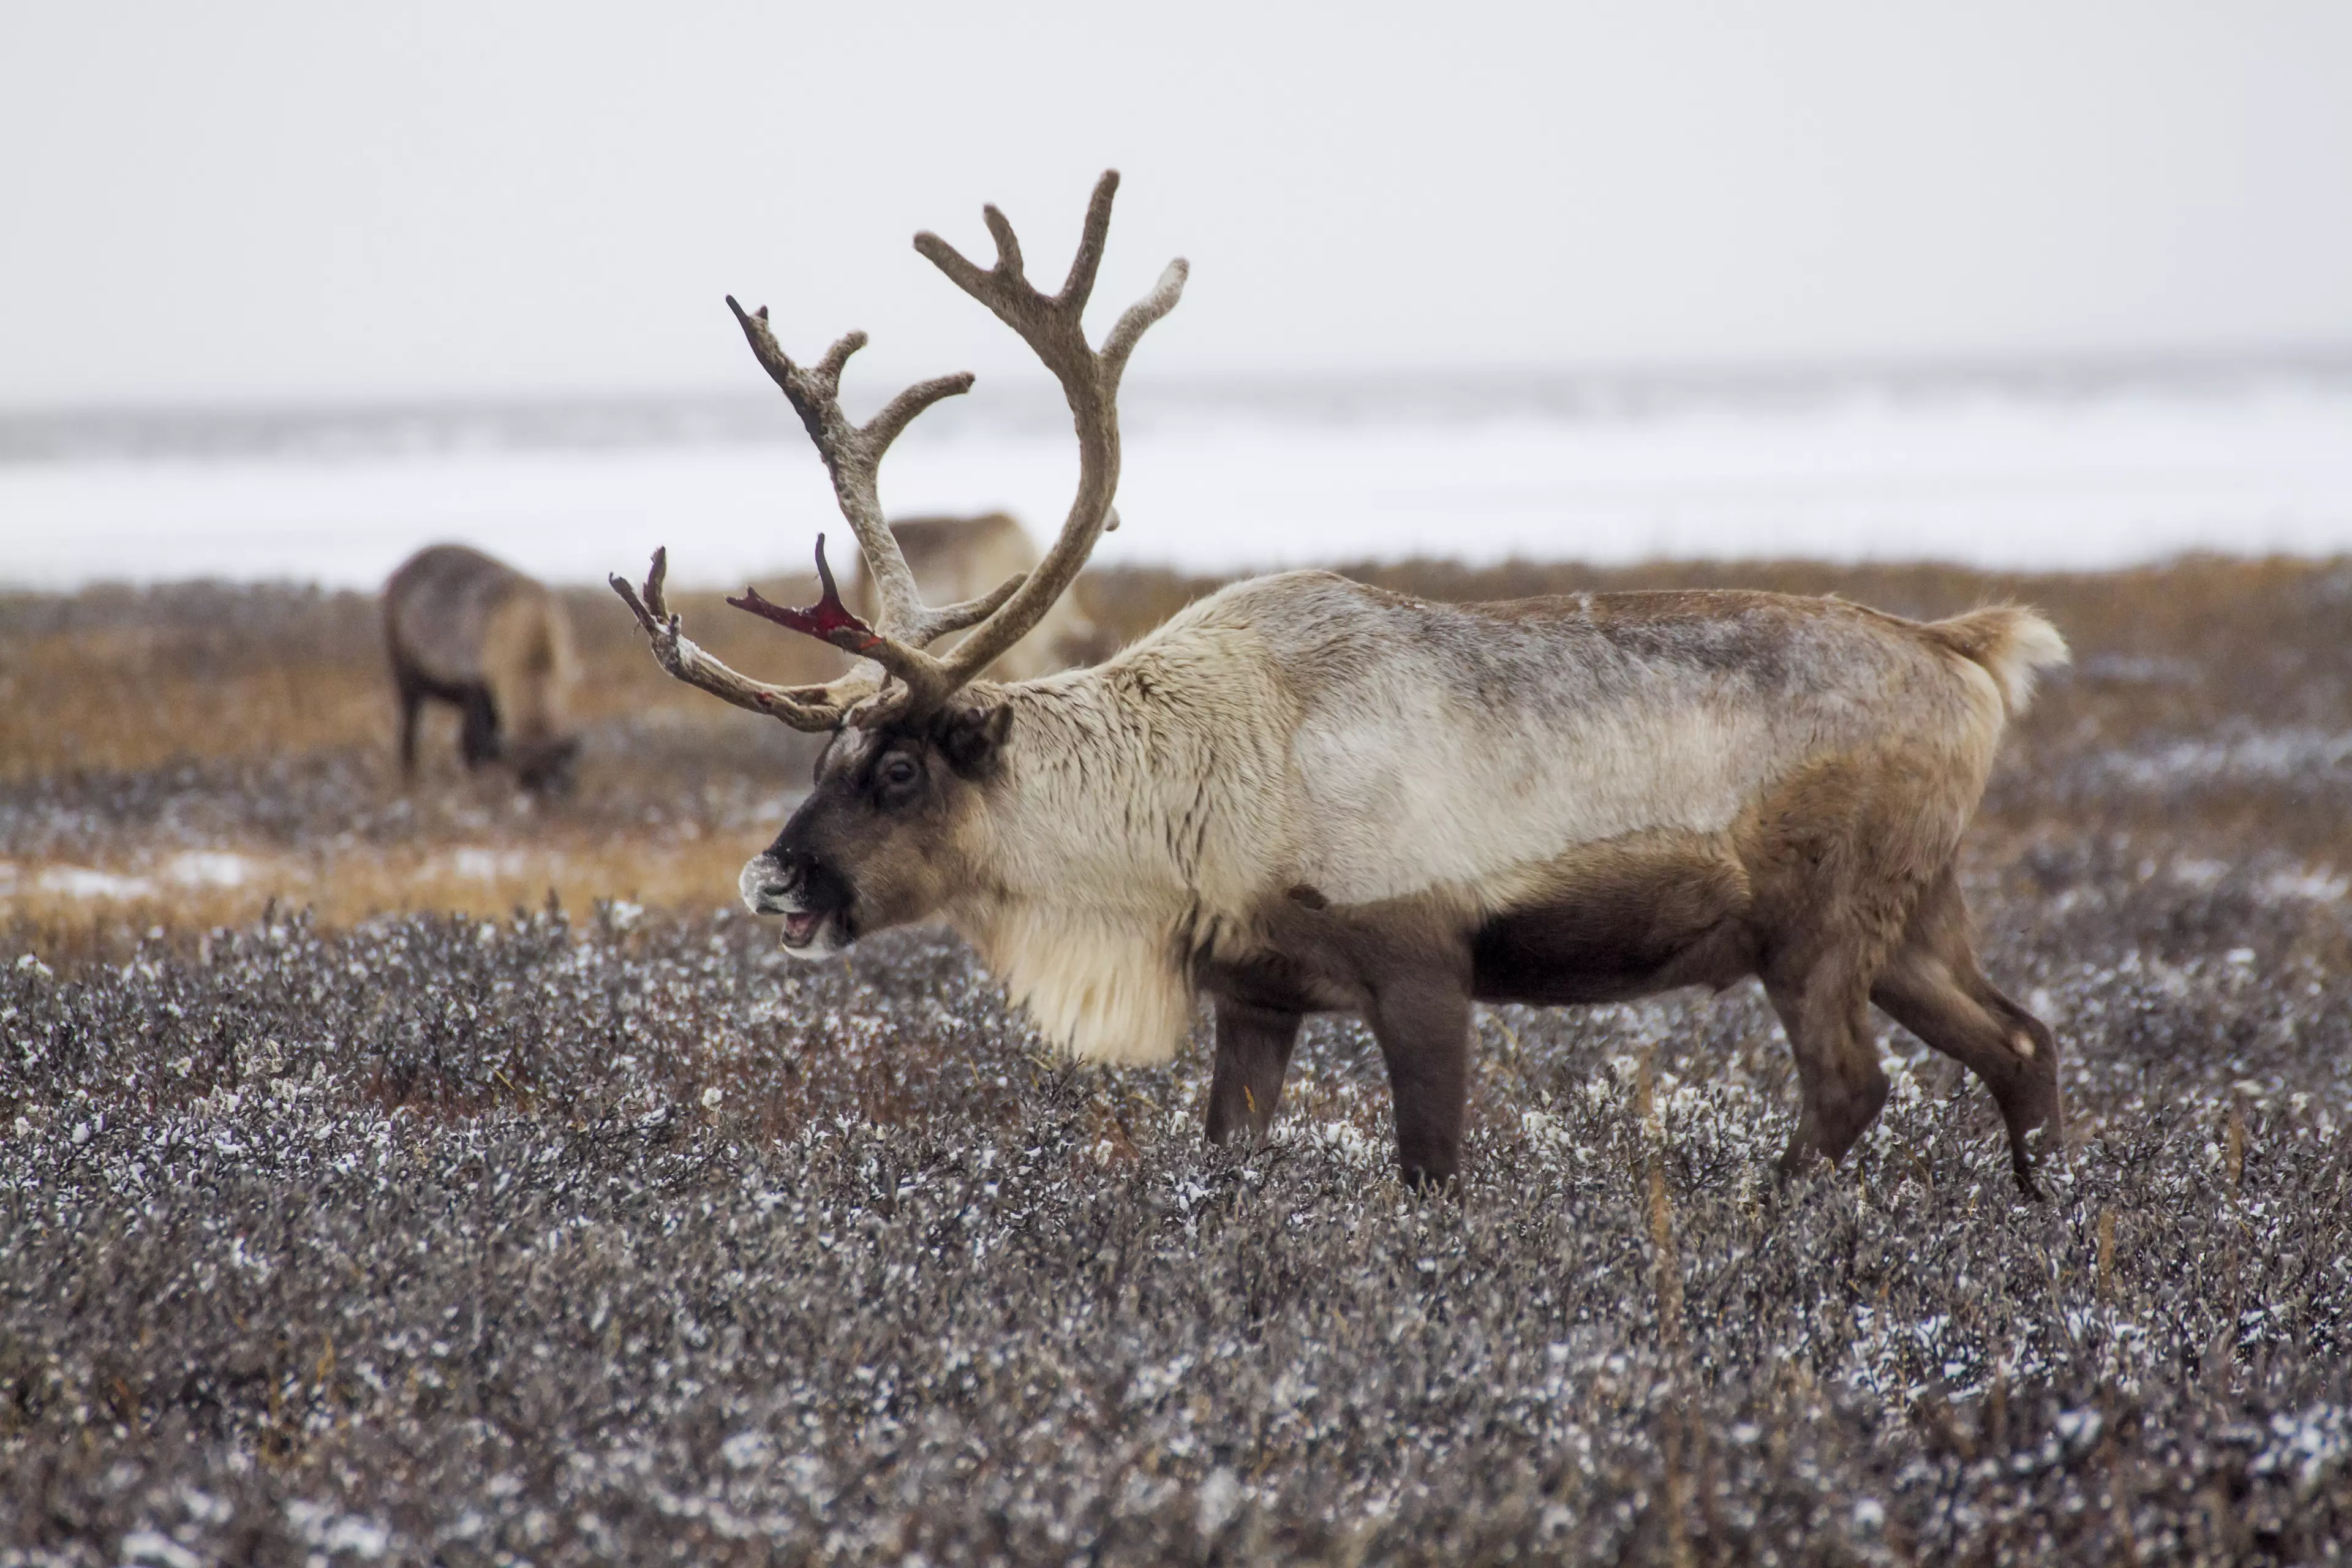 Over 80,000 Reindeers Have Died Of Starvation Due To Melting Ice